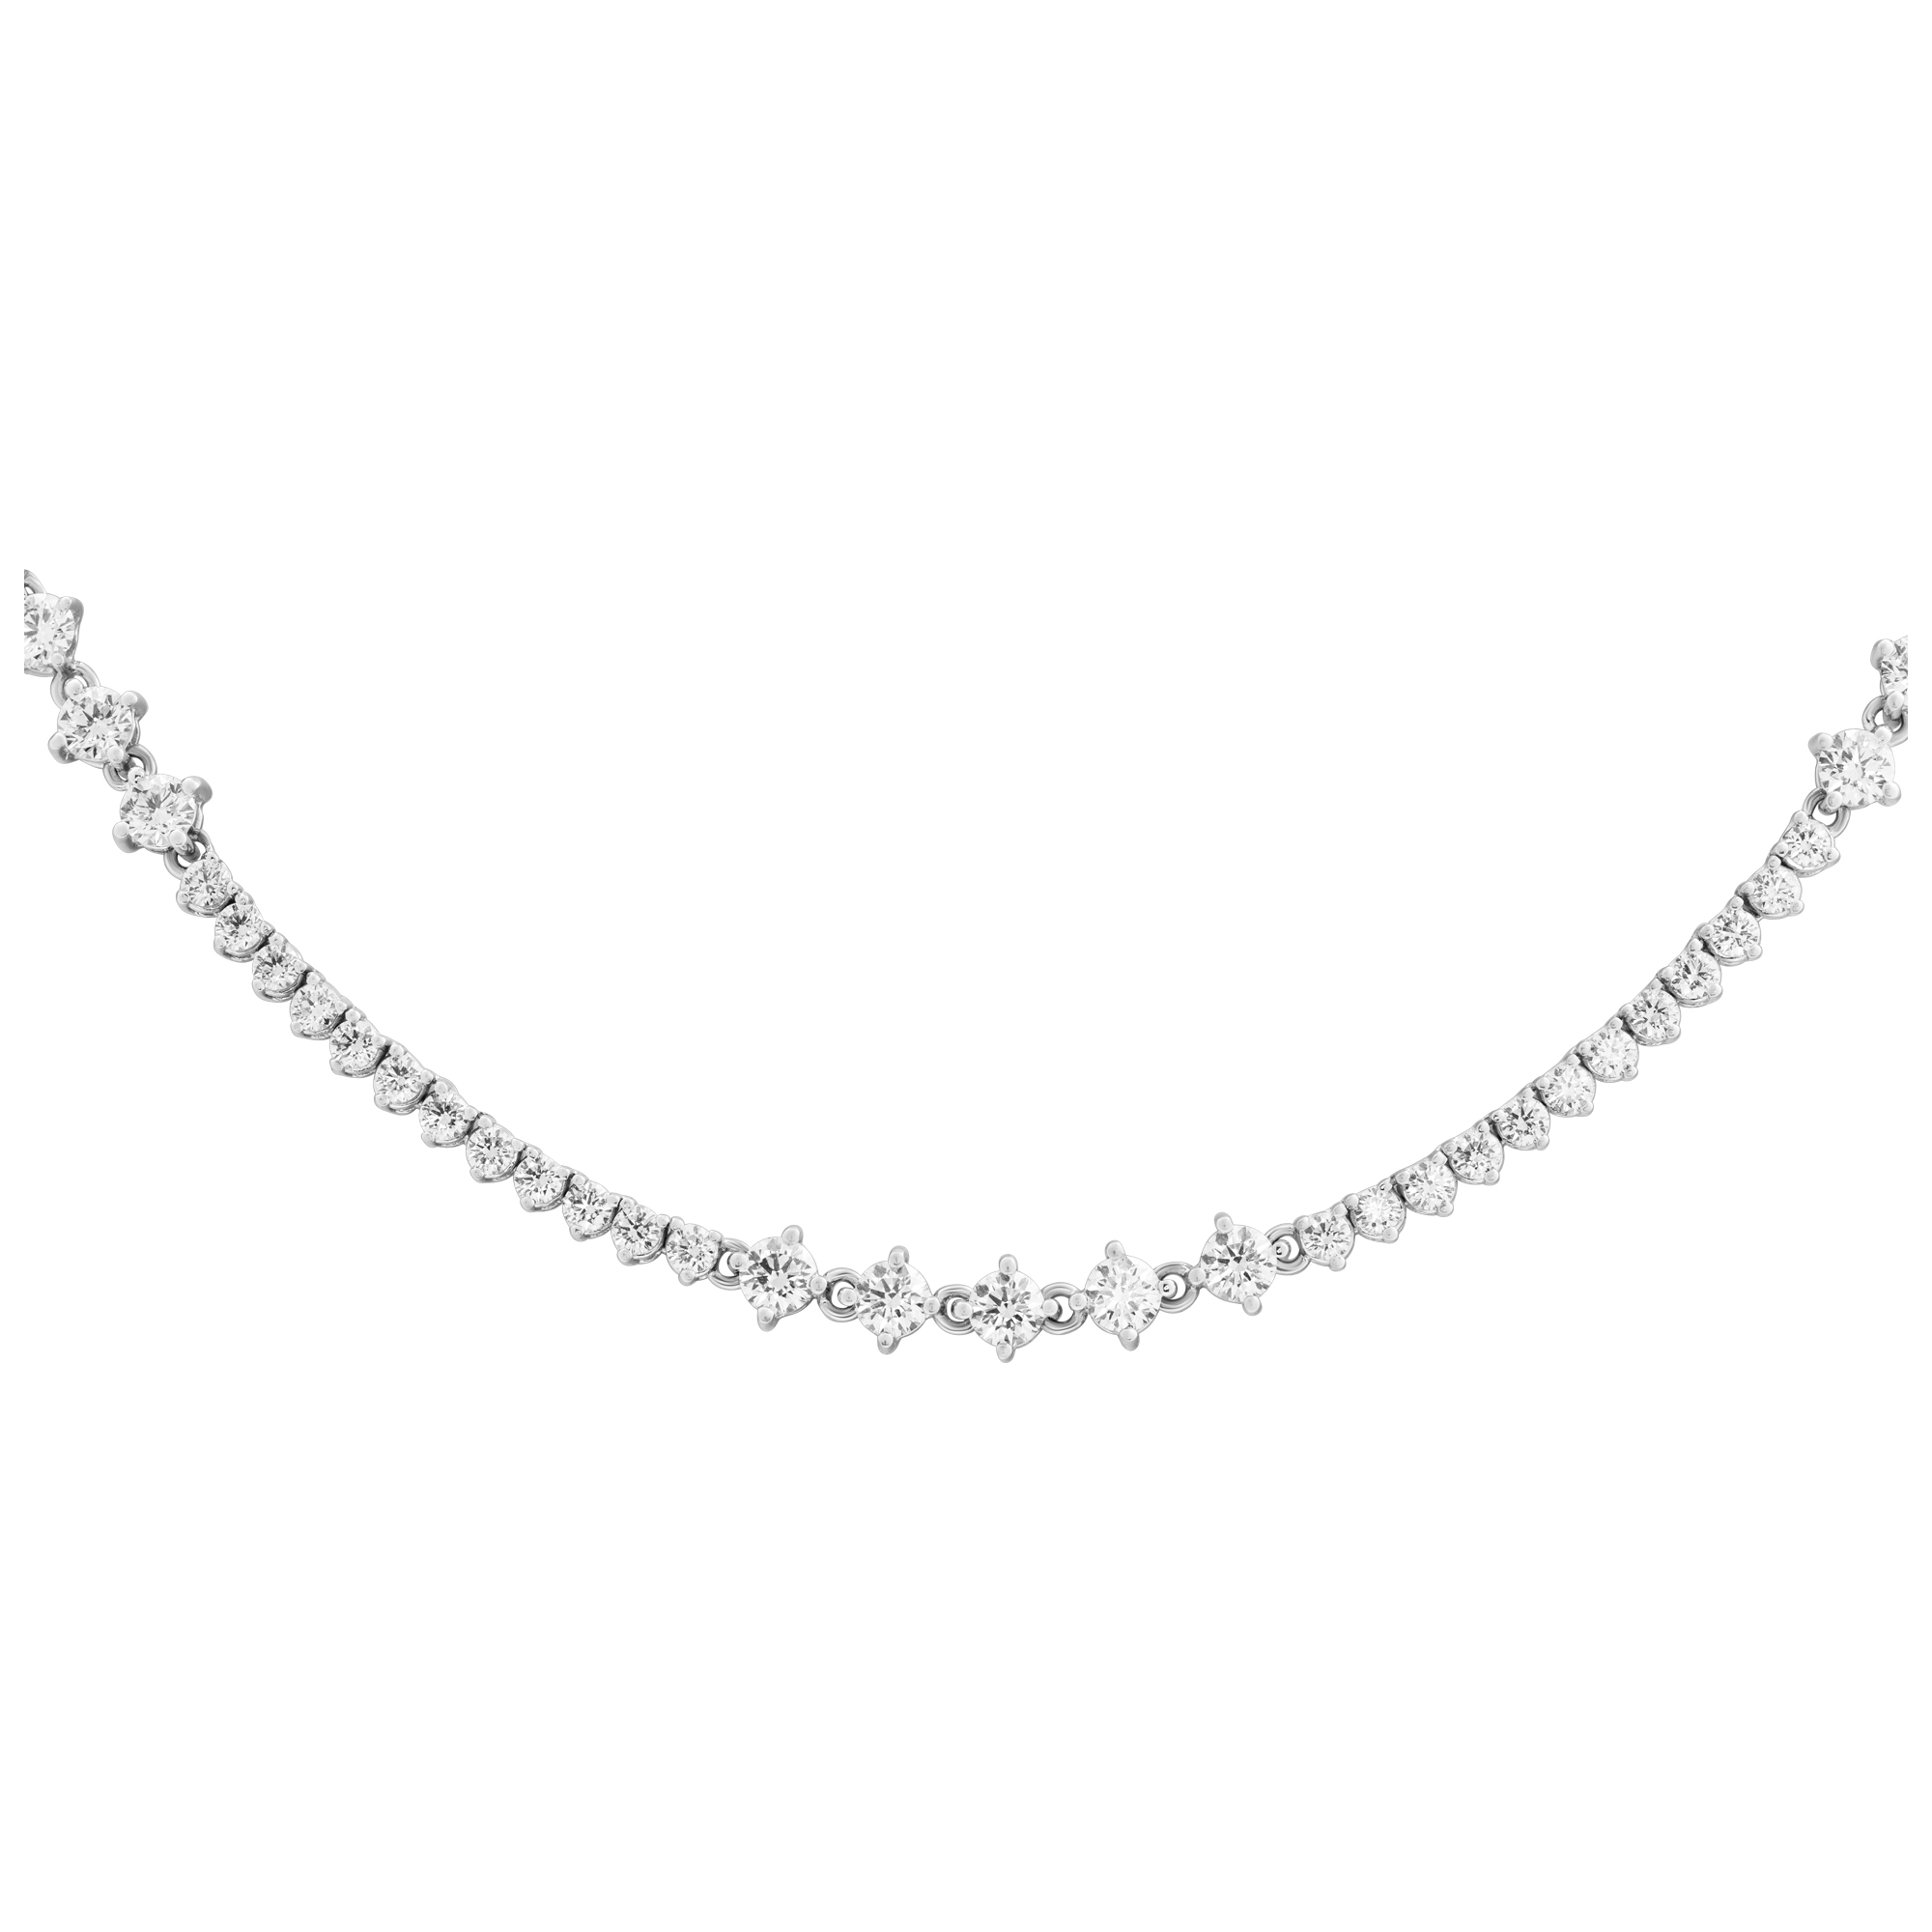 Diamond line necklace in 18k white gold with 7.6 carats in G-H Color VS Clarity diamonds